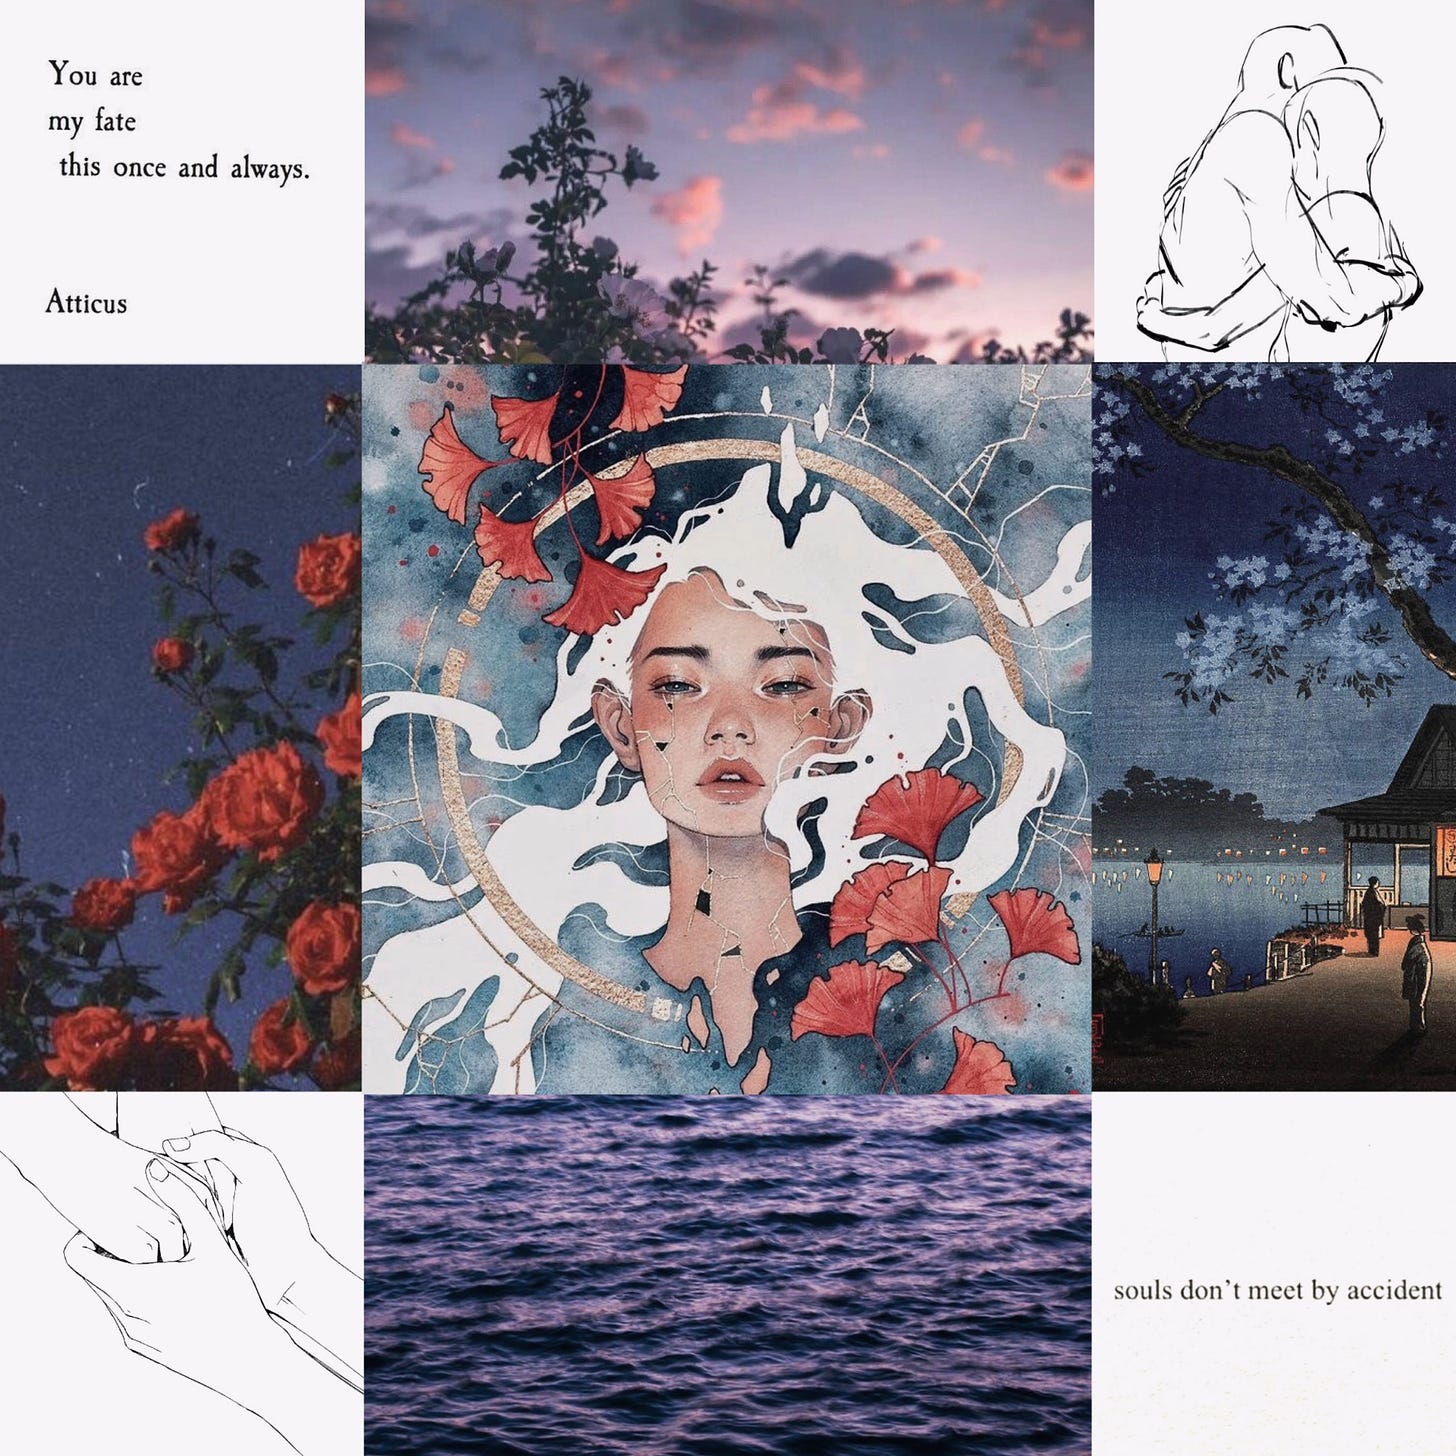 3 by 3 moodboard with blue tones and pops of red, pictures from top left to bottom right: 1. "you are my fate, this once and always", 2. trees silhouetted against a purple-blue sky, 3. sketch of a boy and girl embracing, 4. red roses silhouetted against a dark blue sky, 5. illustration of a girl with white hair surrounded by red ginkgo leaves against a blue background reminiscent of the sea, 6. illustration of a lakeside with mountains in the background and a house with warm orange light in the foreground, 7. line art of a pair of hands clasping each other, 8. purple-blue surface of the sea, 9. "souls don't meet by accident"